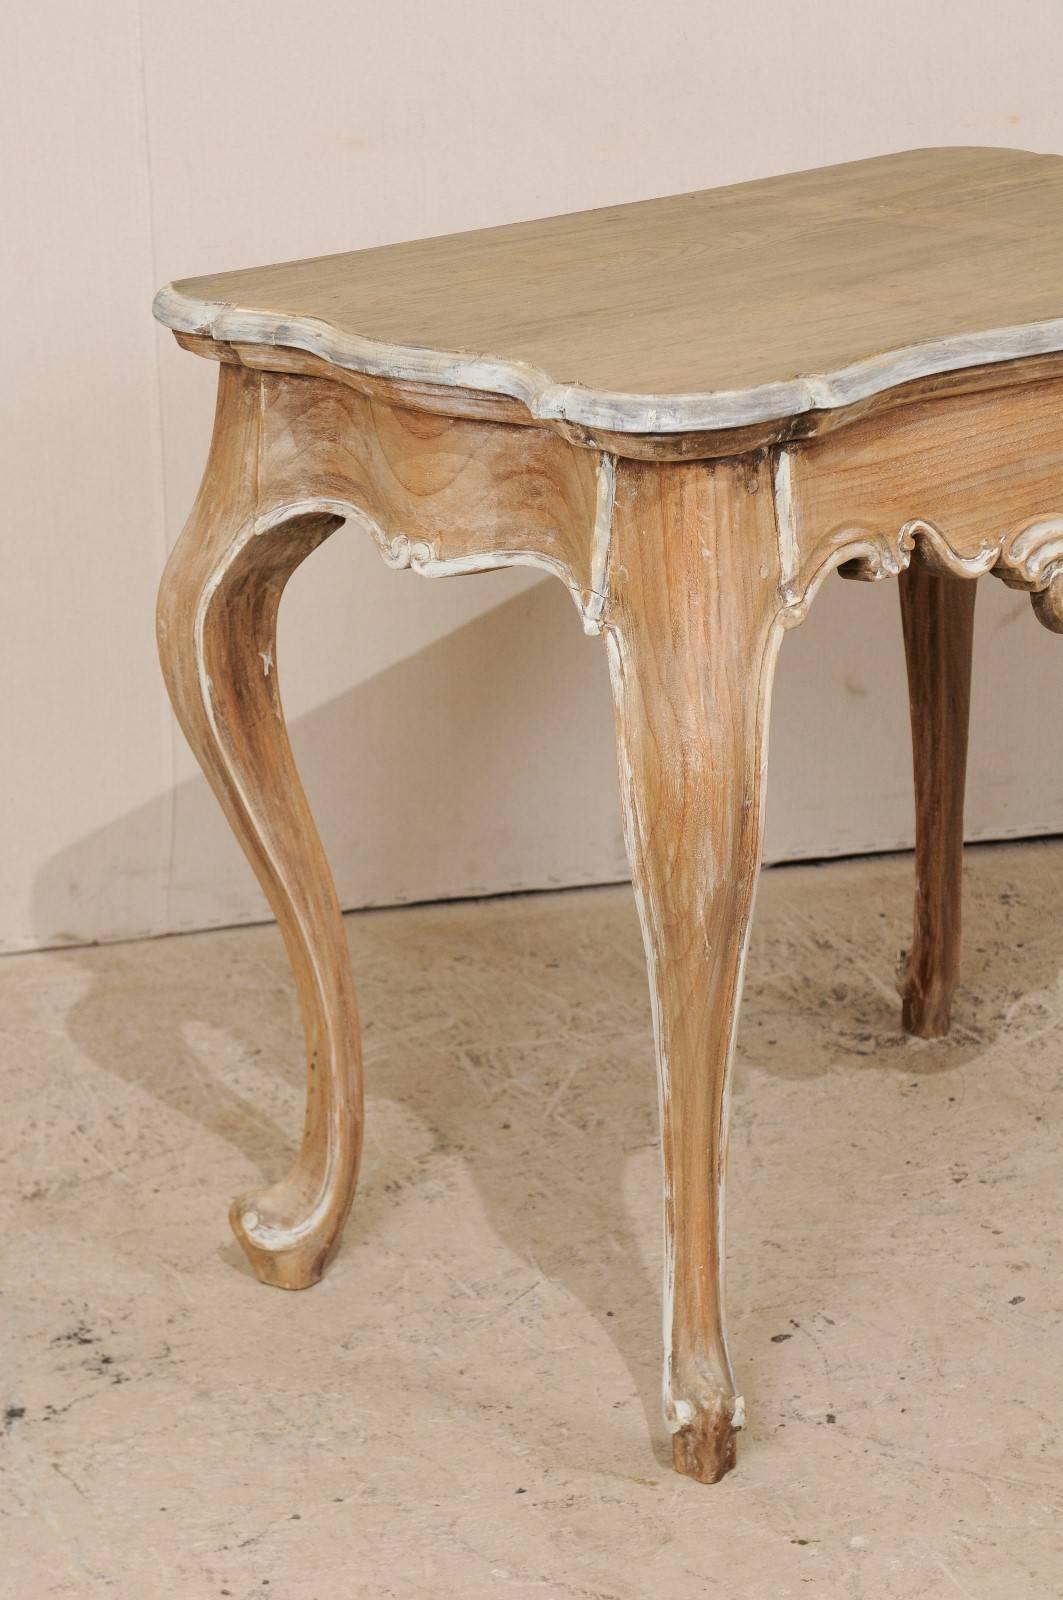 Lovely Brazilian Accent Table of Natural Wood with Painted Trim & Cabriole Legs 1